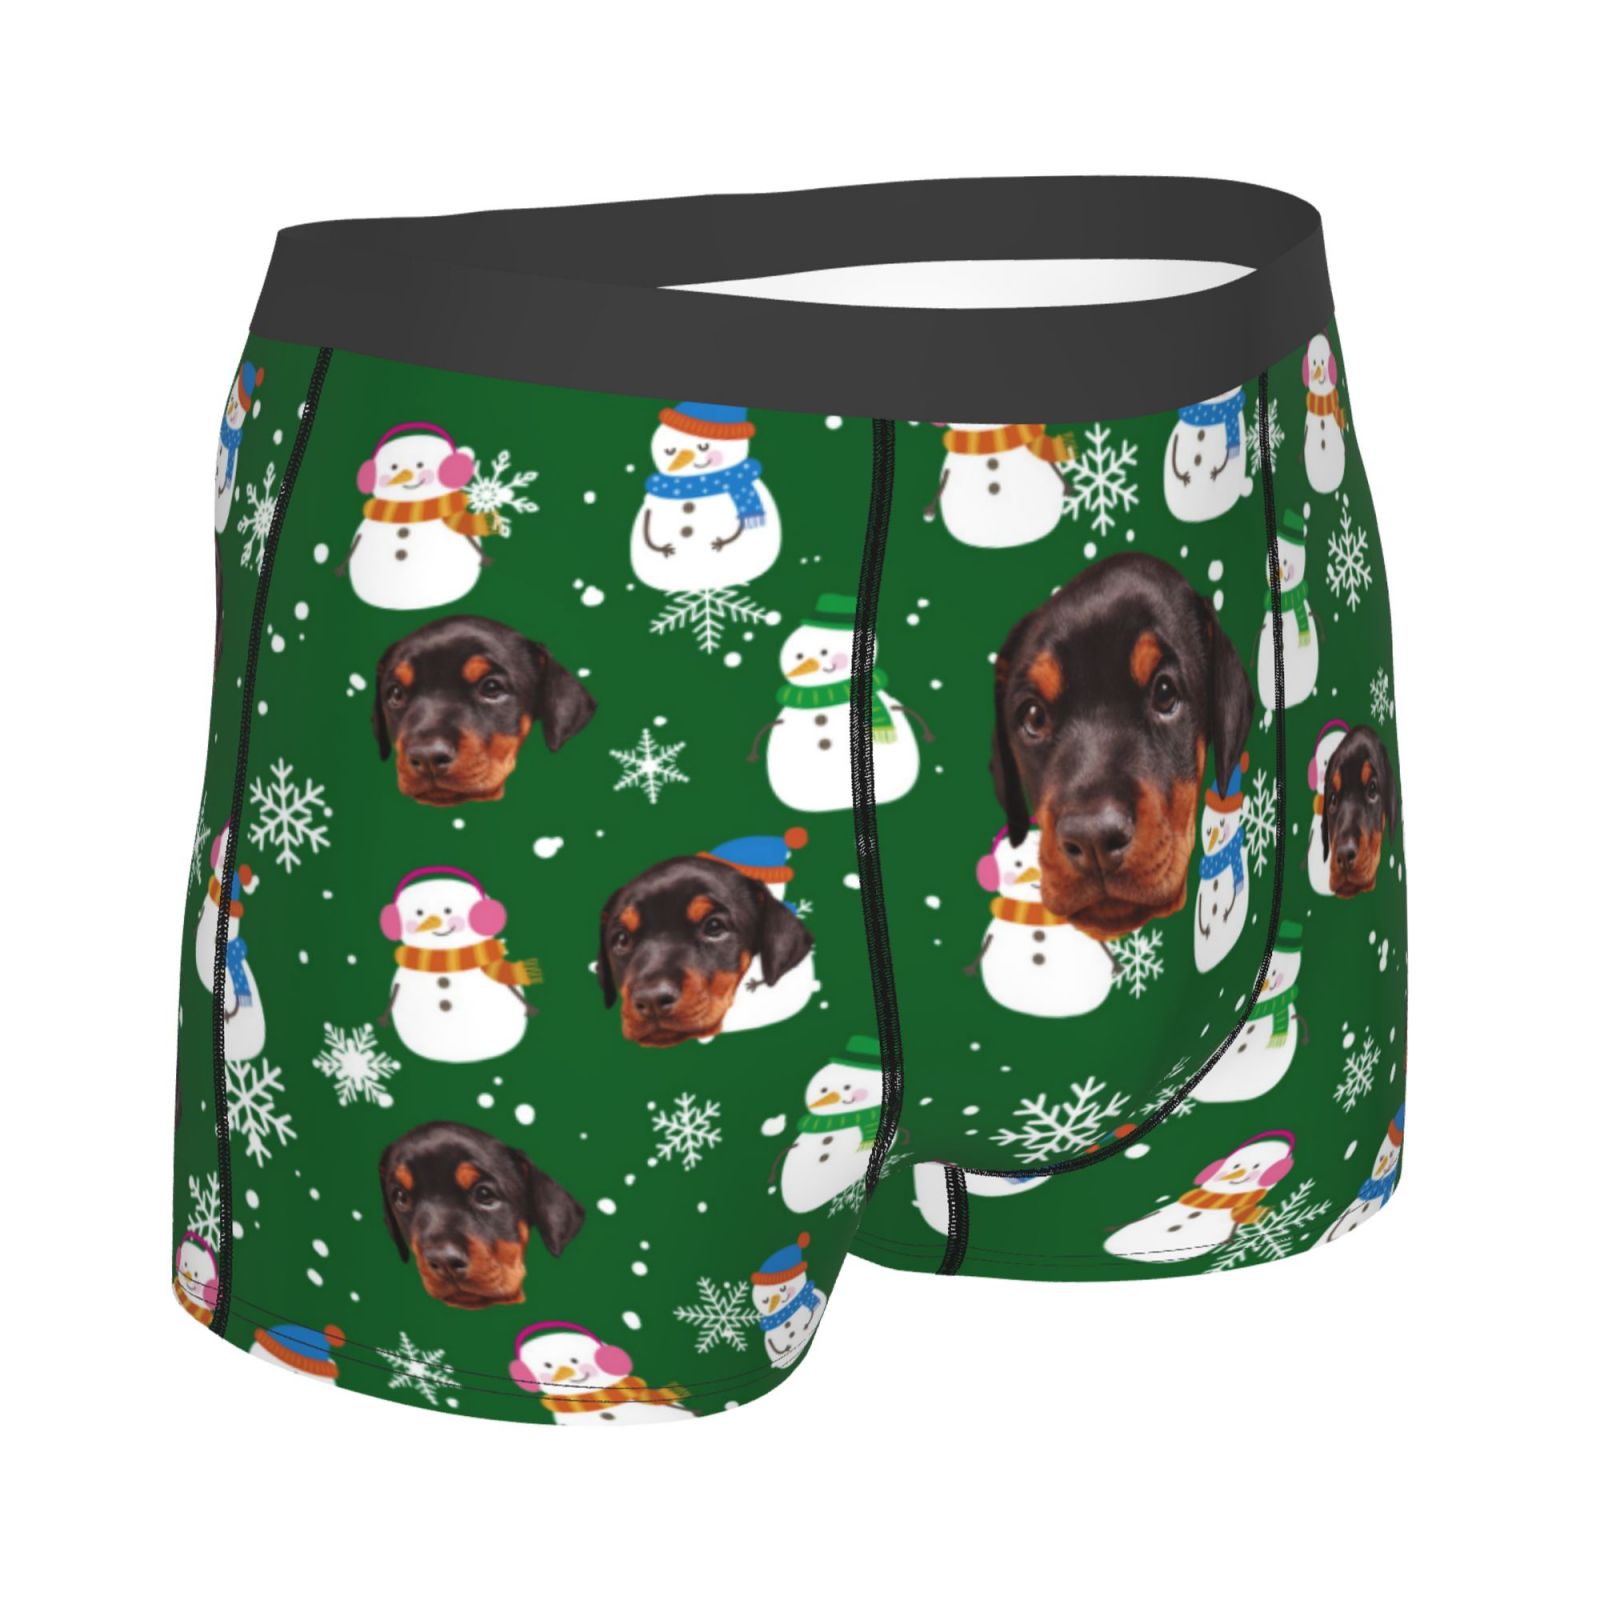 Personalized Photo Underwear Christmas Gift Custom Face Boxers Shorts Christmas Snowman